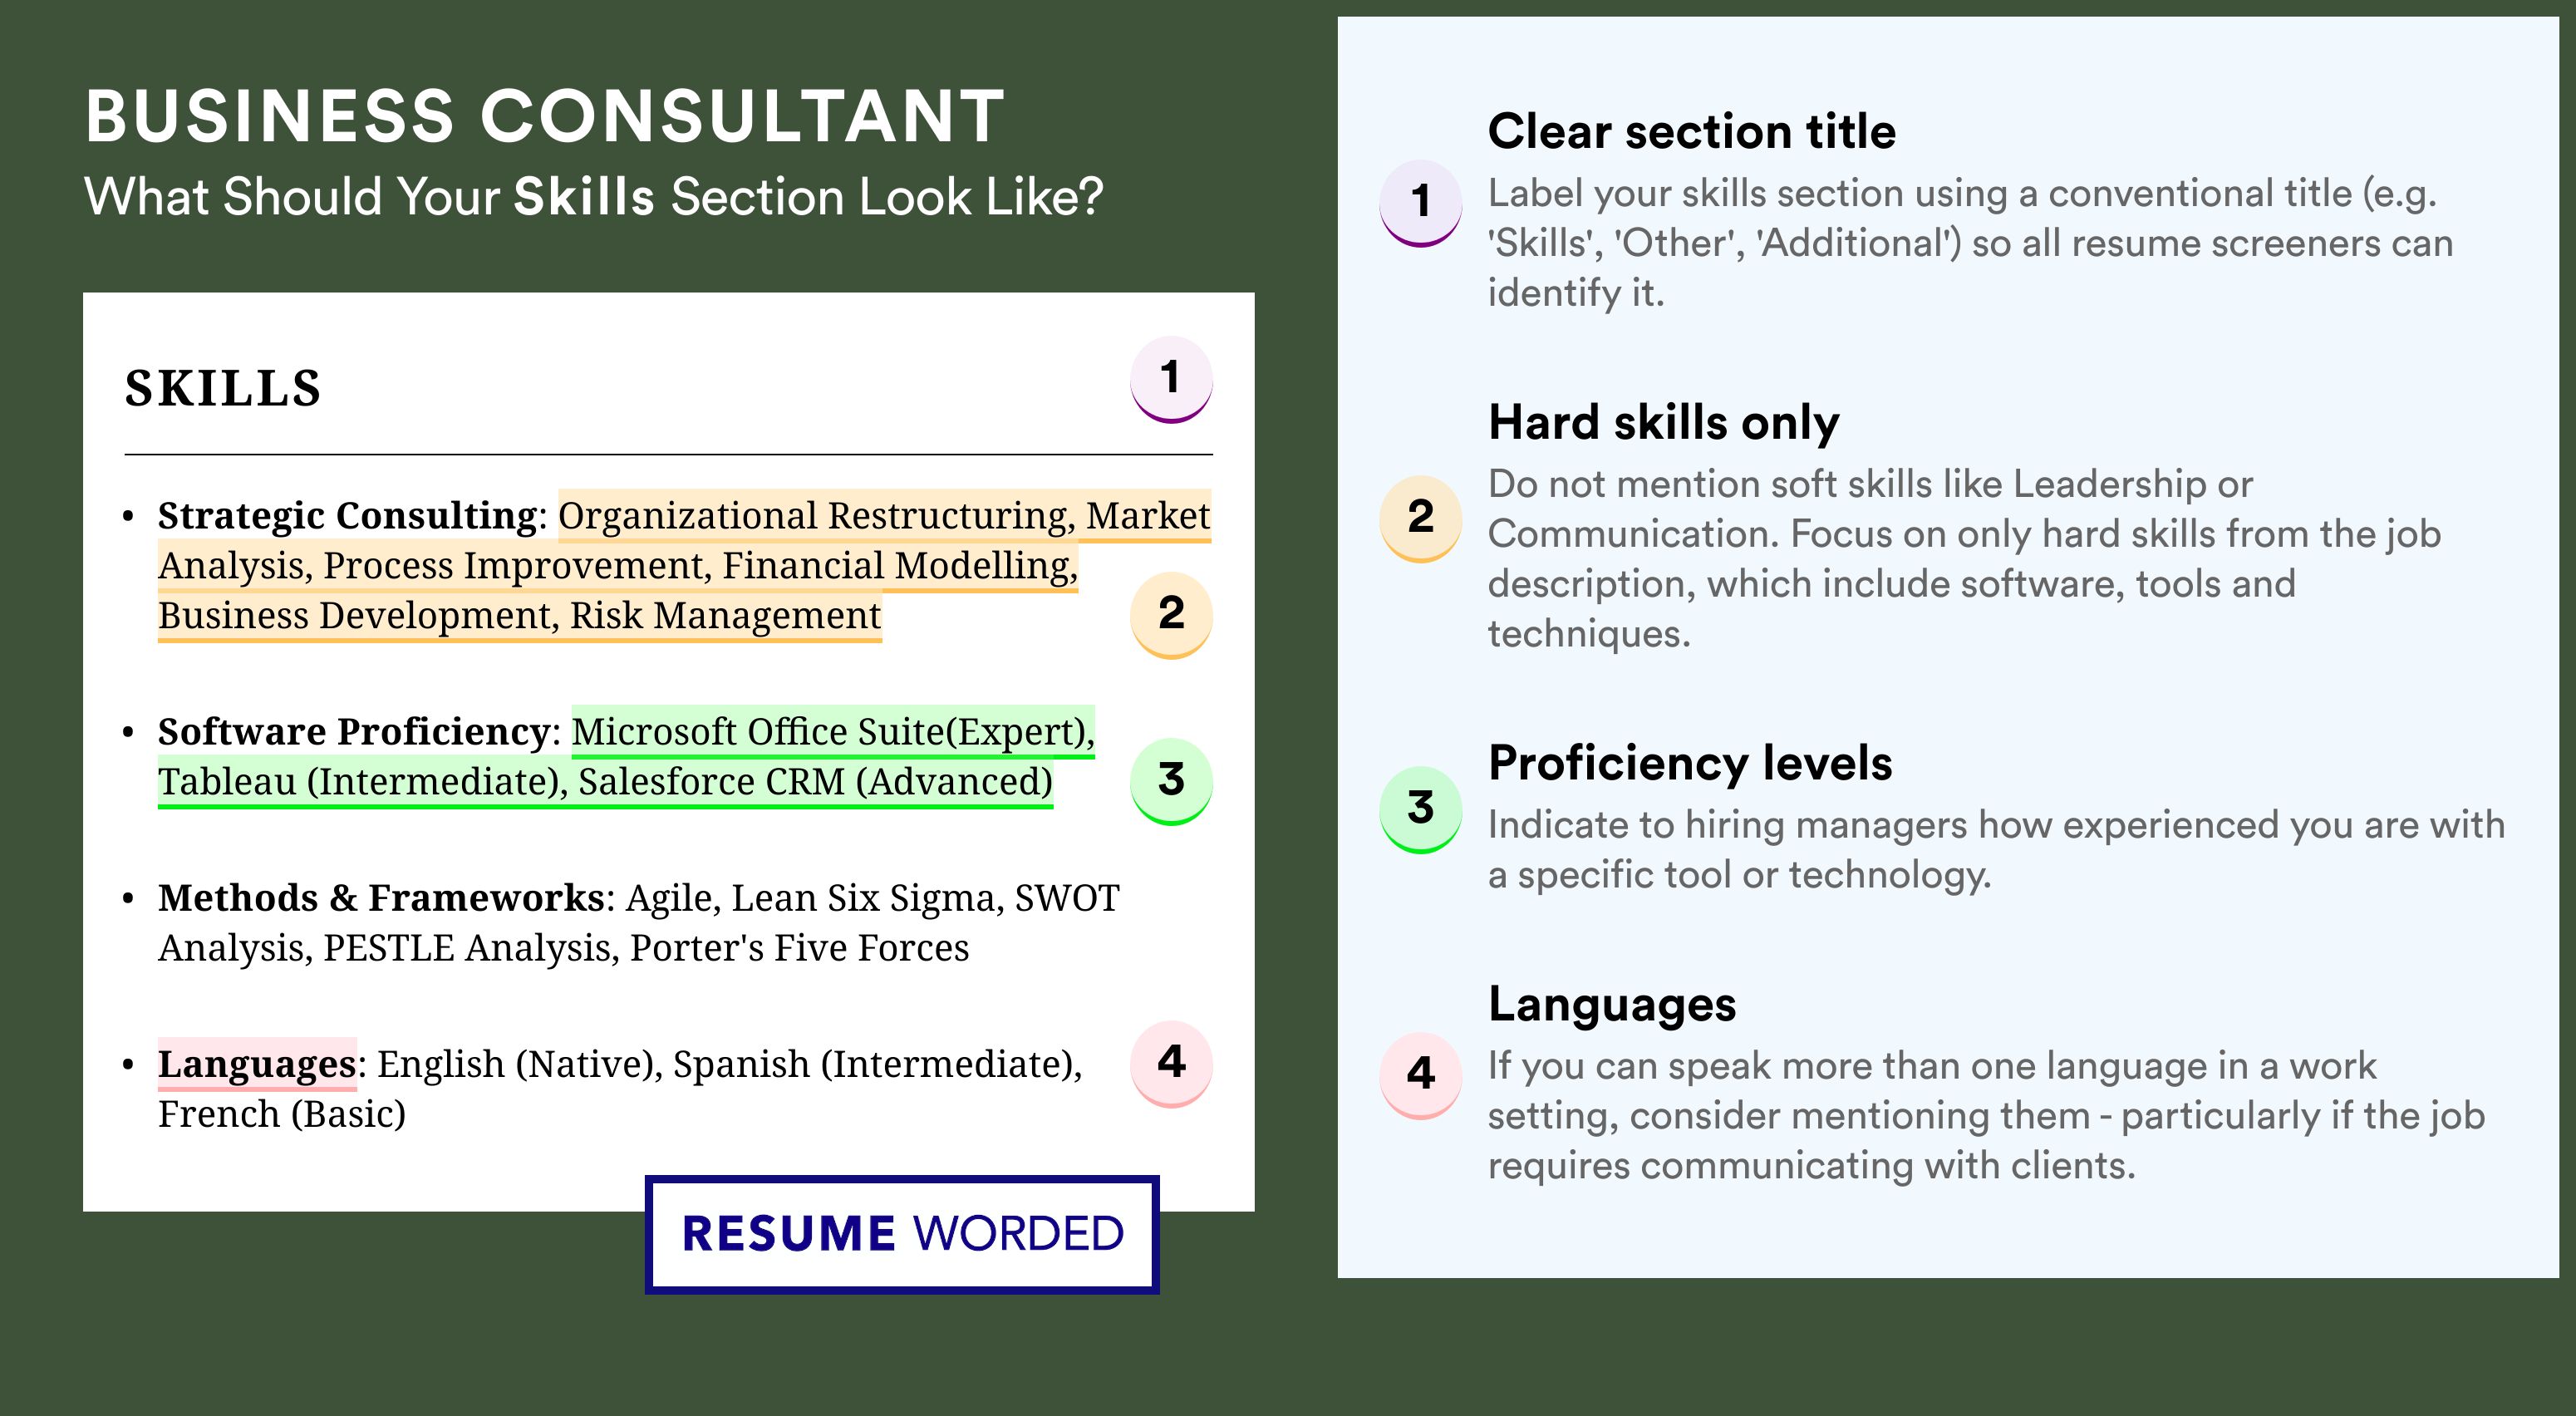 How To Write Your Skills Section - Business Consultant Roles